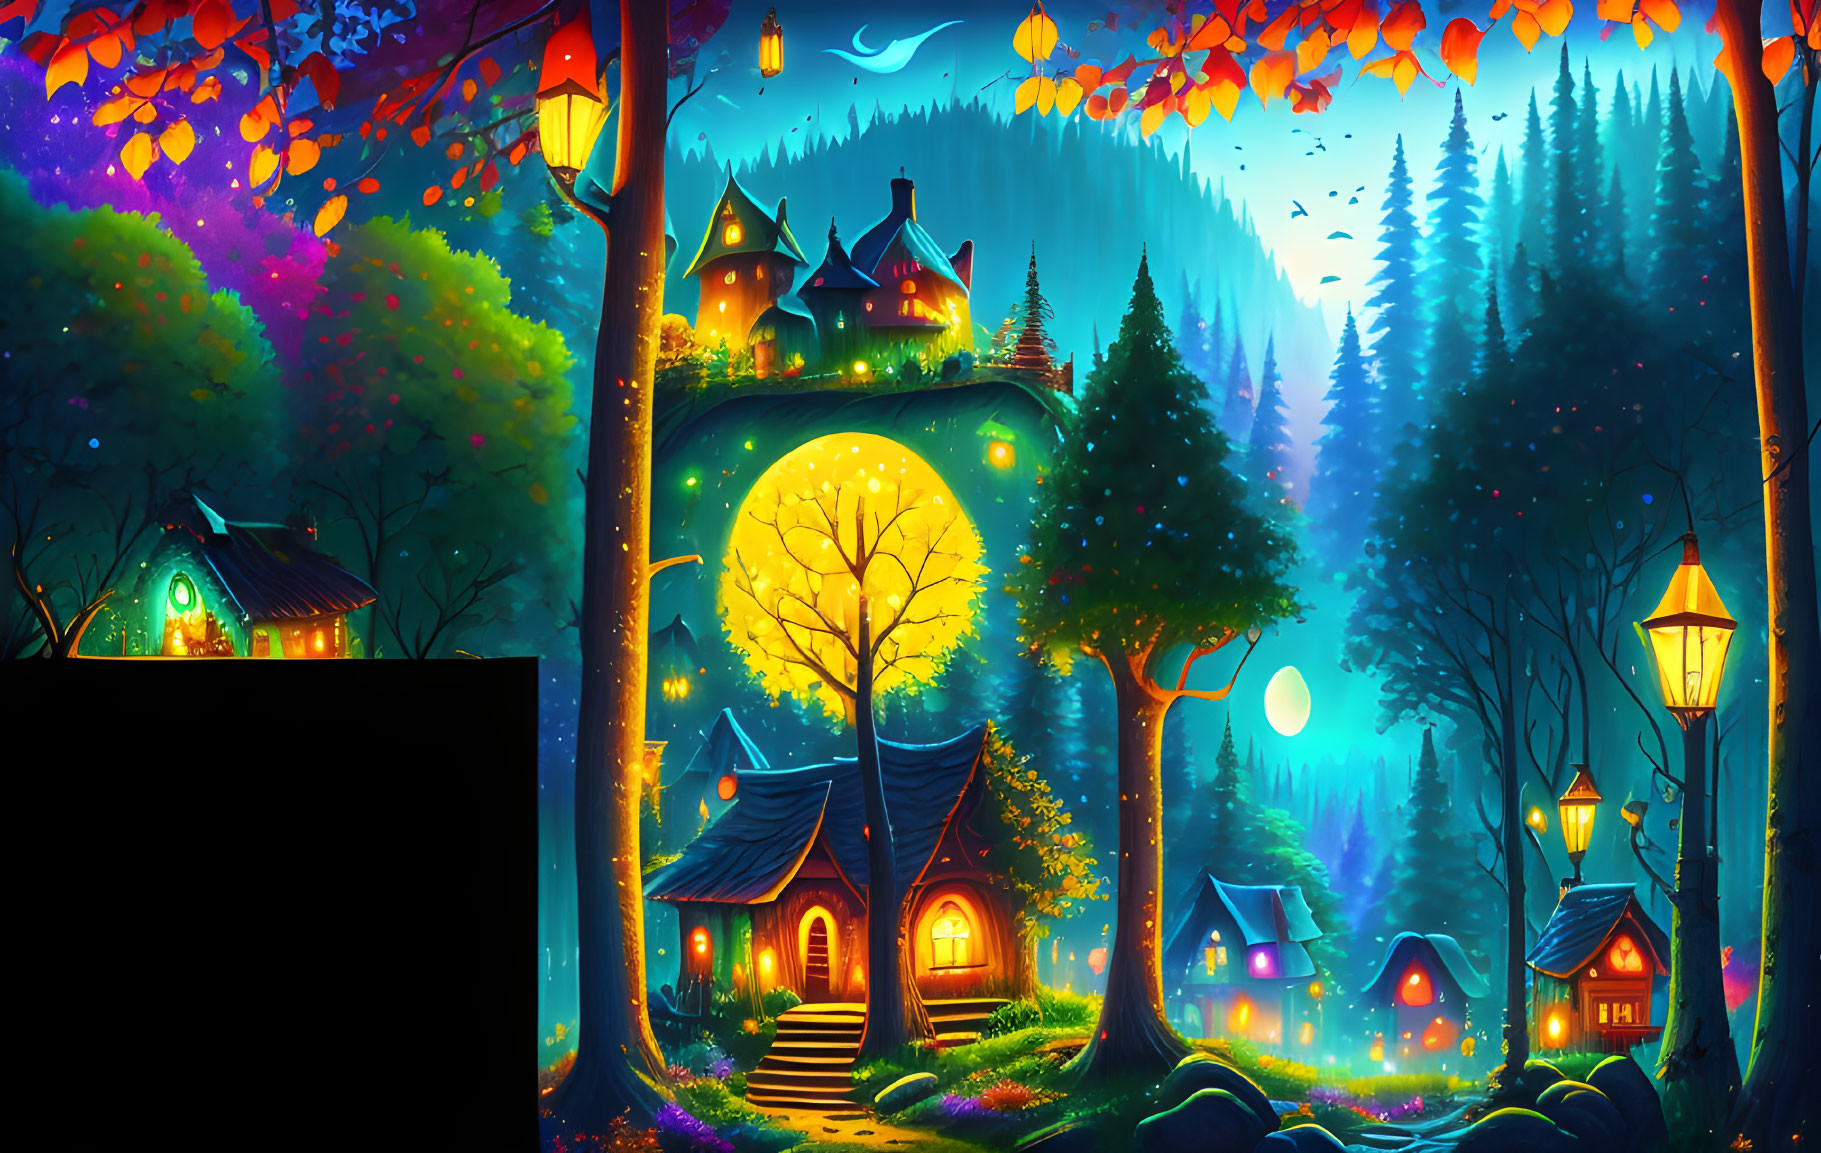 Colorful Trees and Whimsical Cottages in Nighttime Fantasy Landscape